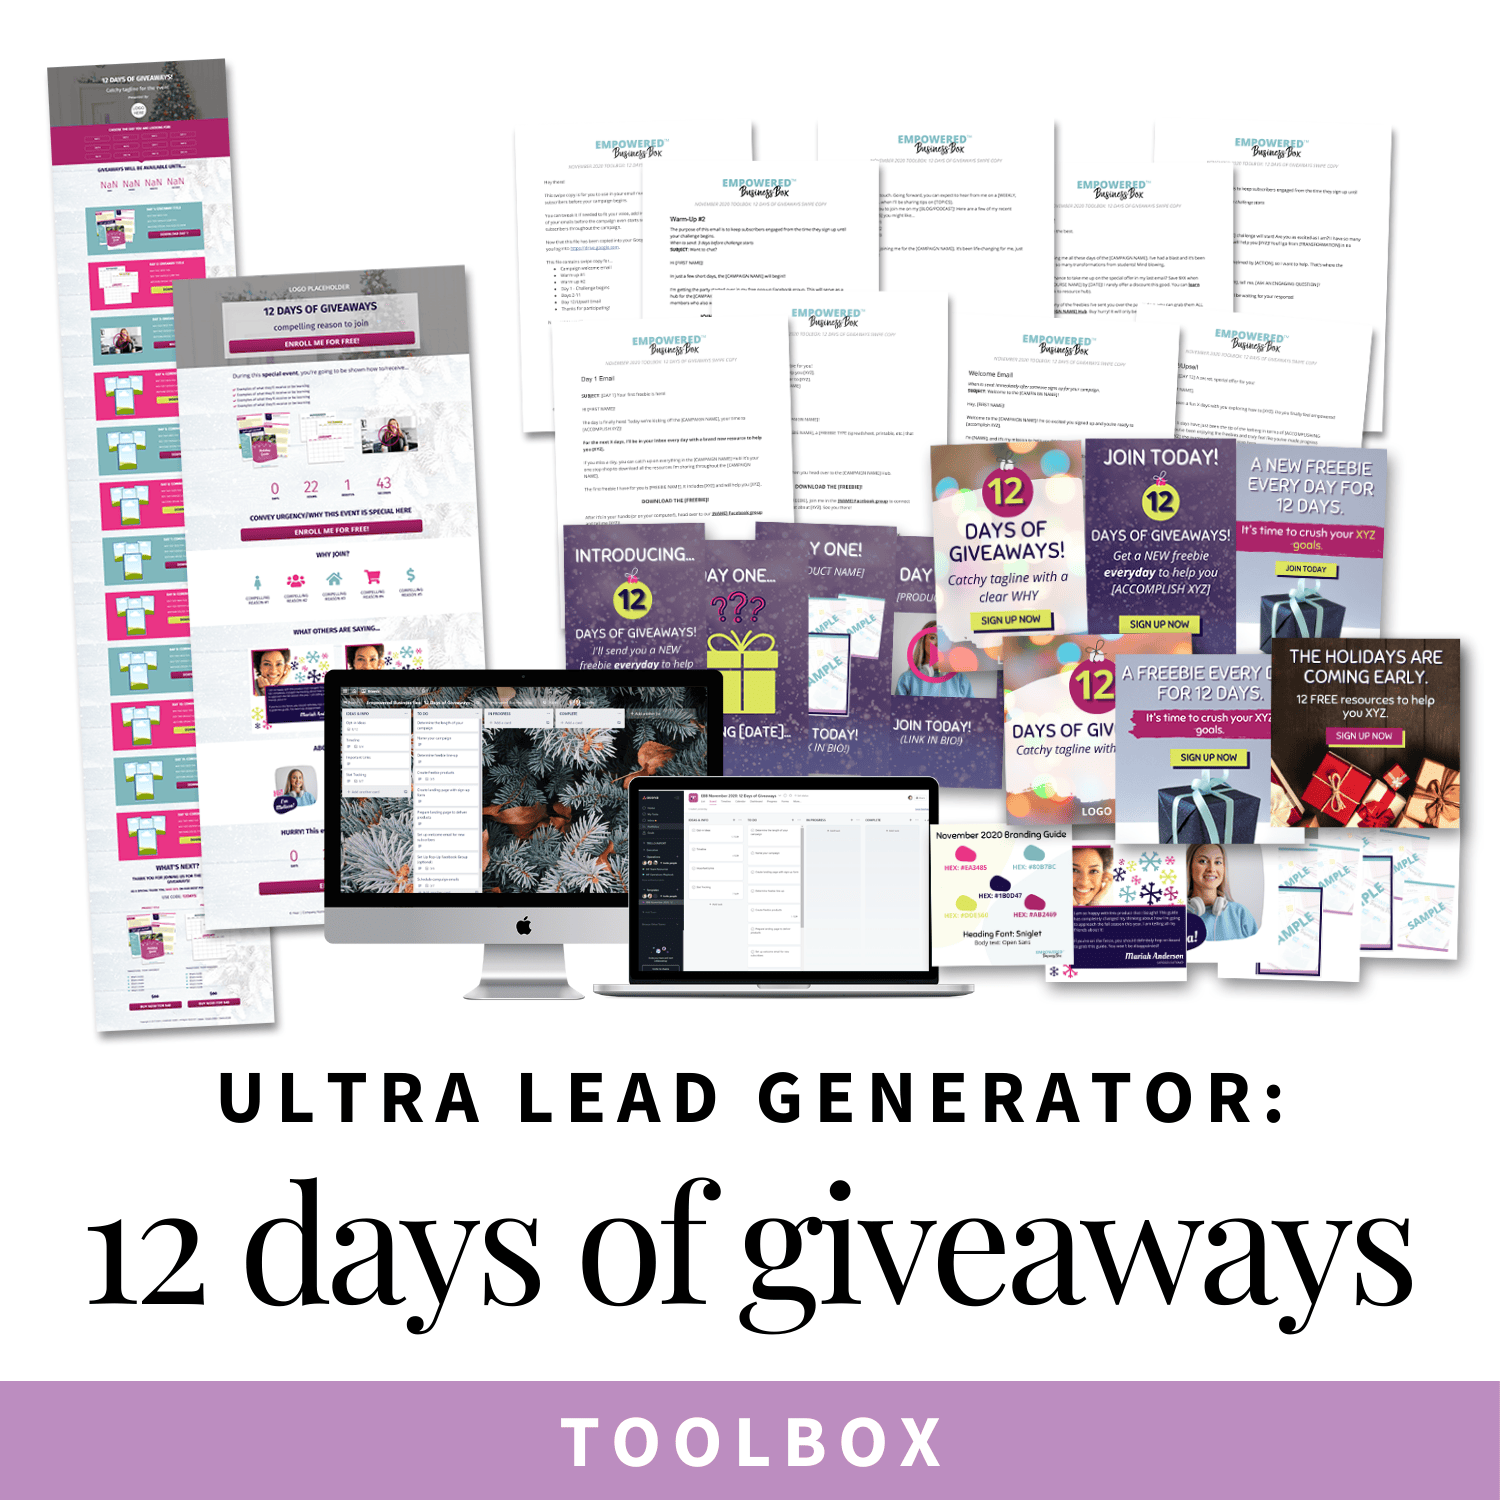 12 Days of Giveaways toolbox